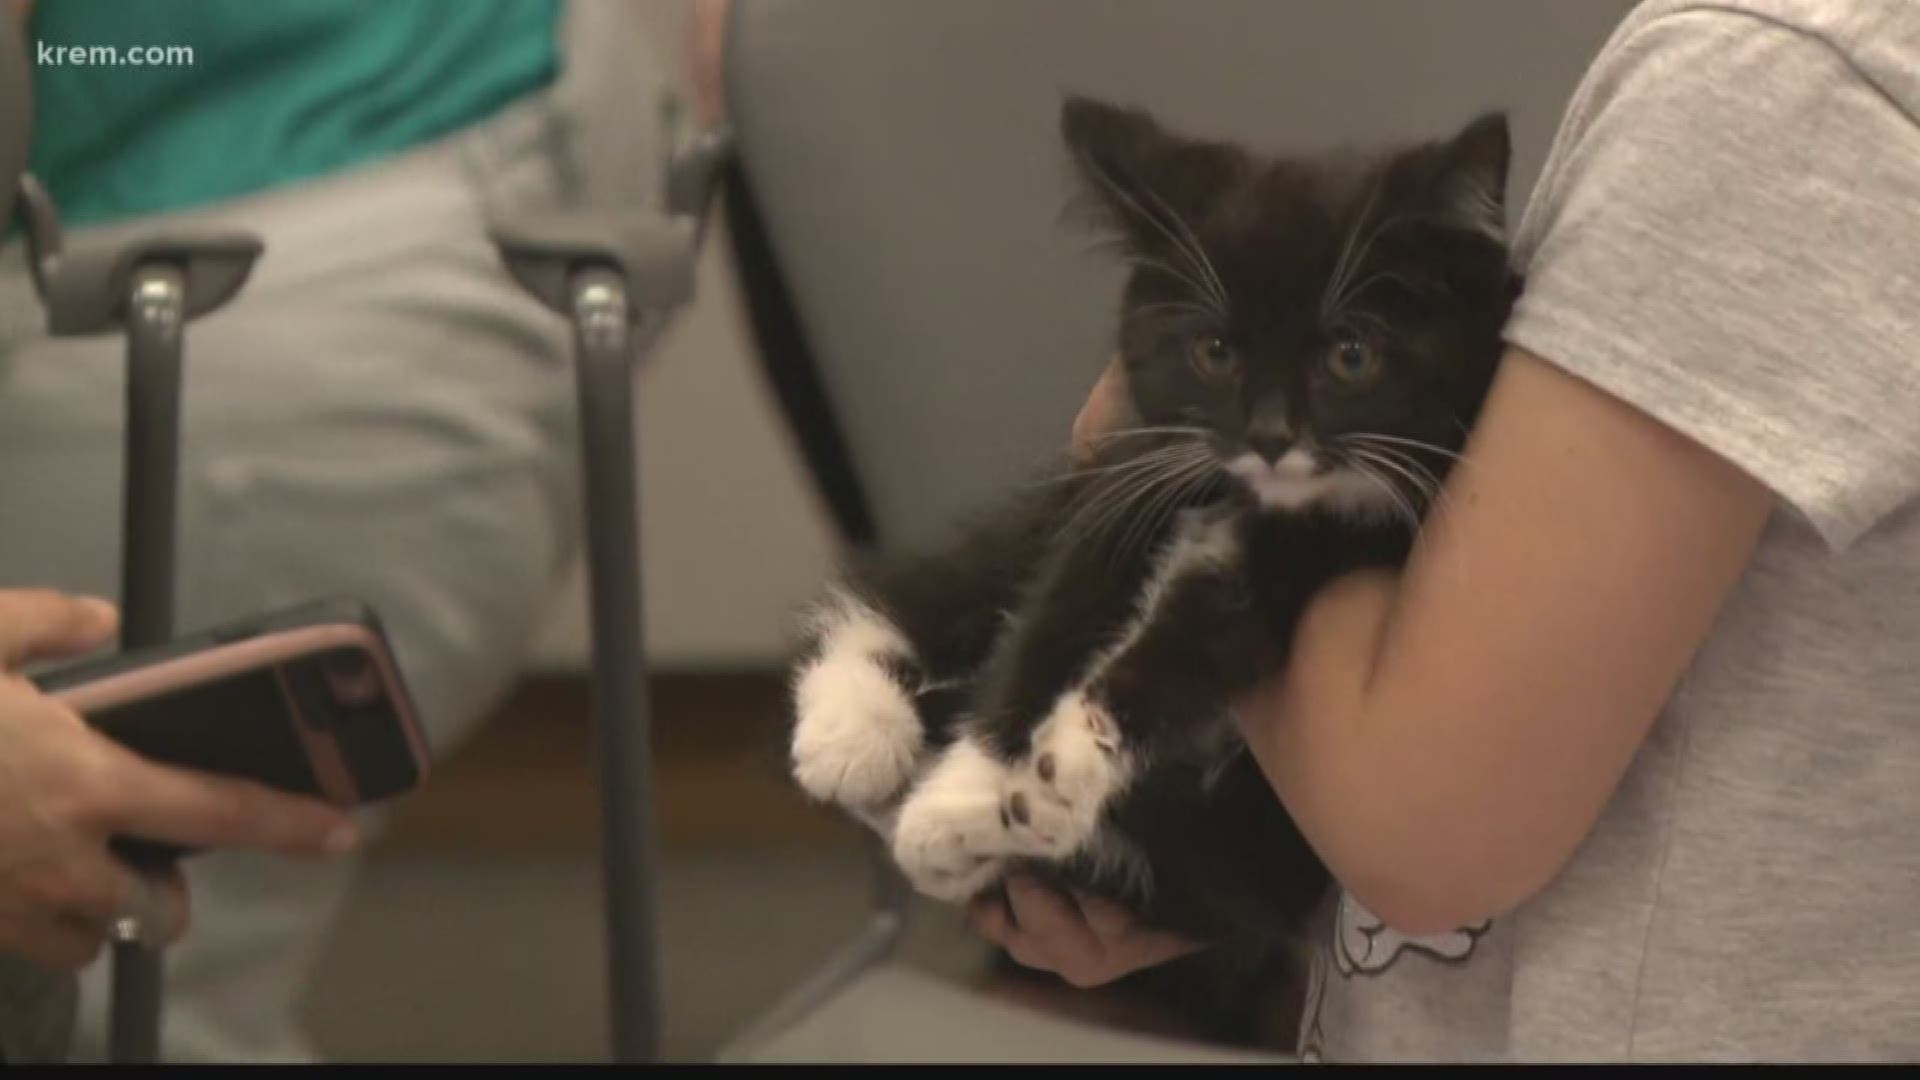 This week was 'Pet week' across the nation and the library decided to get in on the action by hosting a 'Cat Cafe.' Everyone was loving on these kittens.